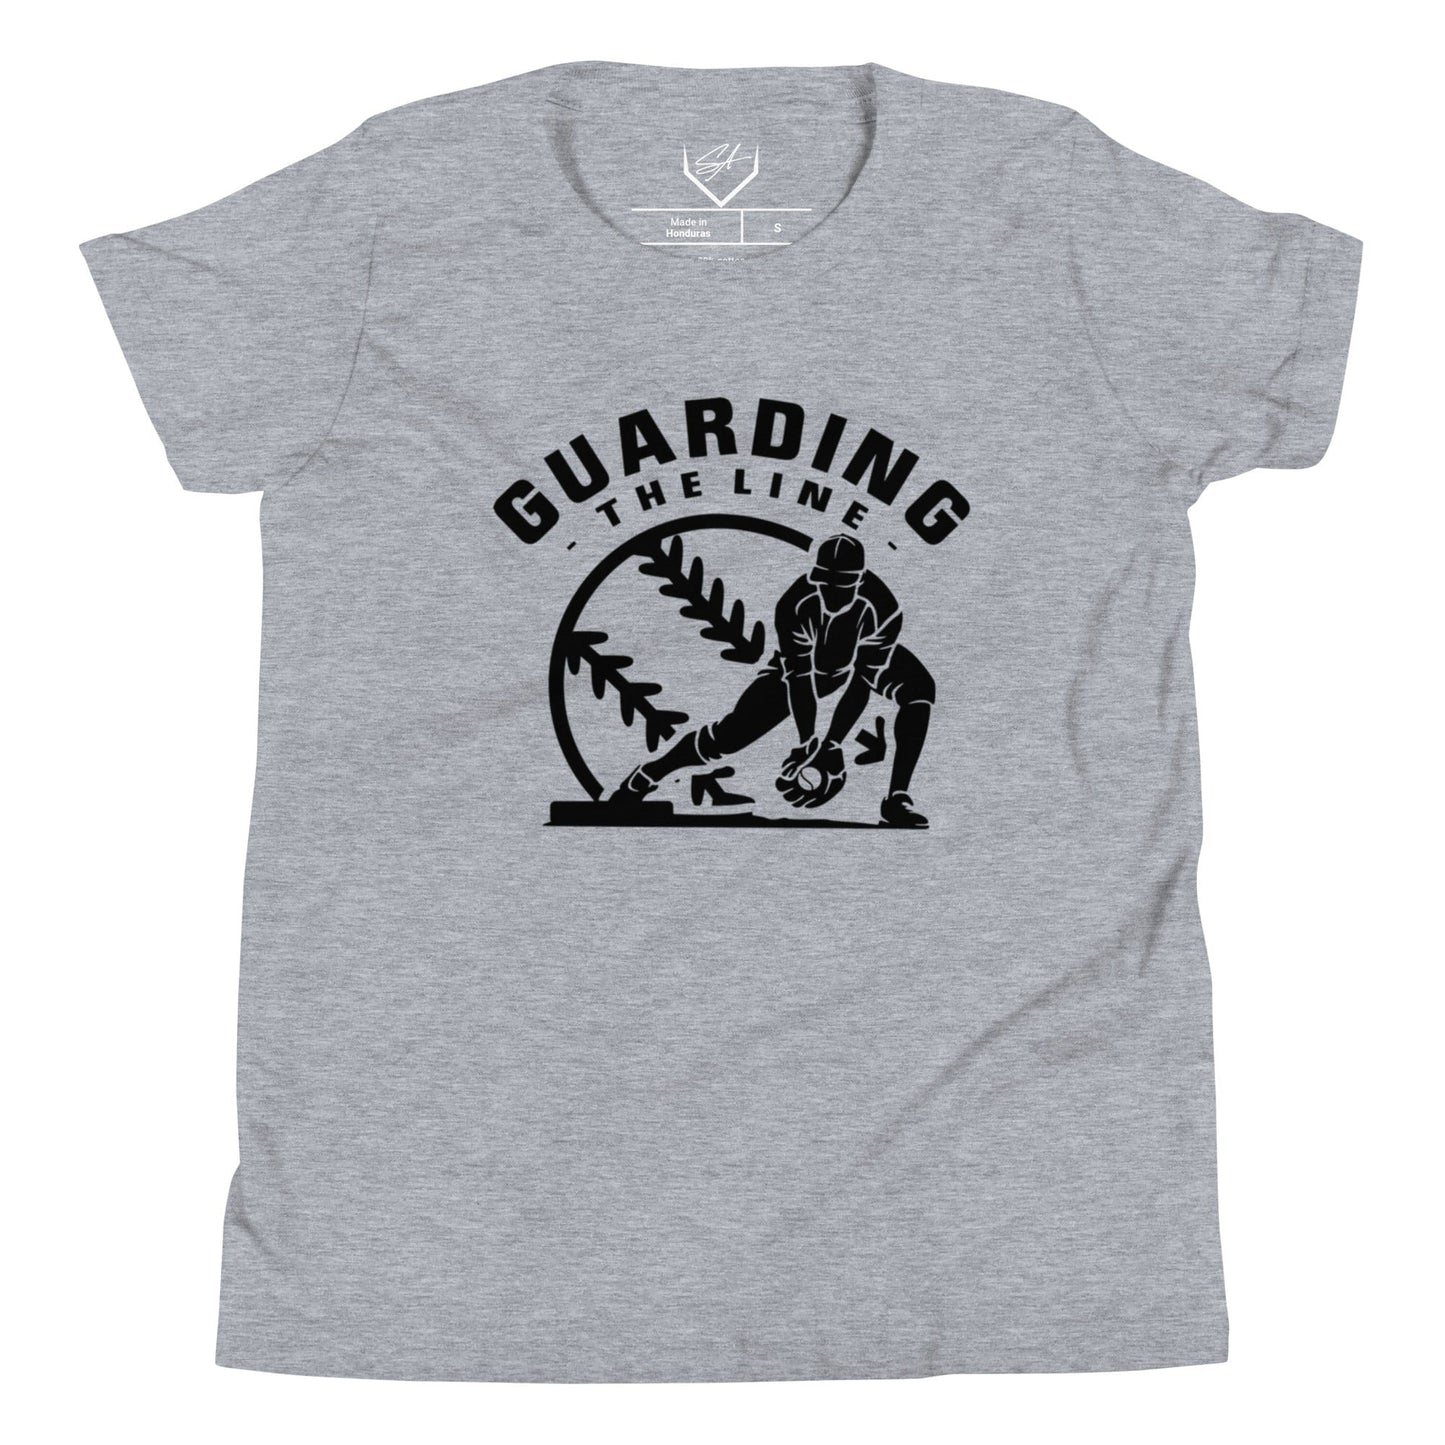 Guarding The Line - Youth Tee